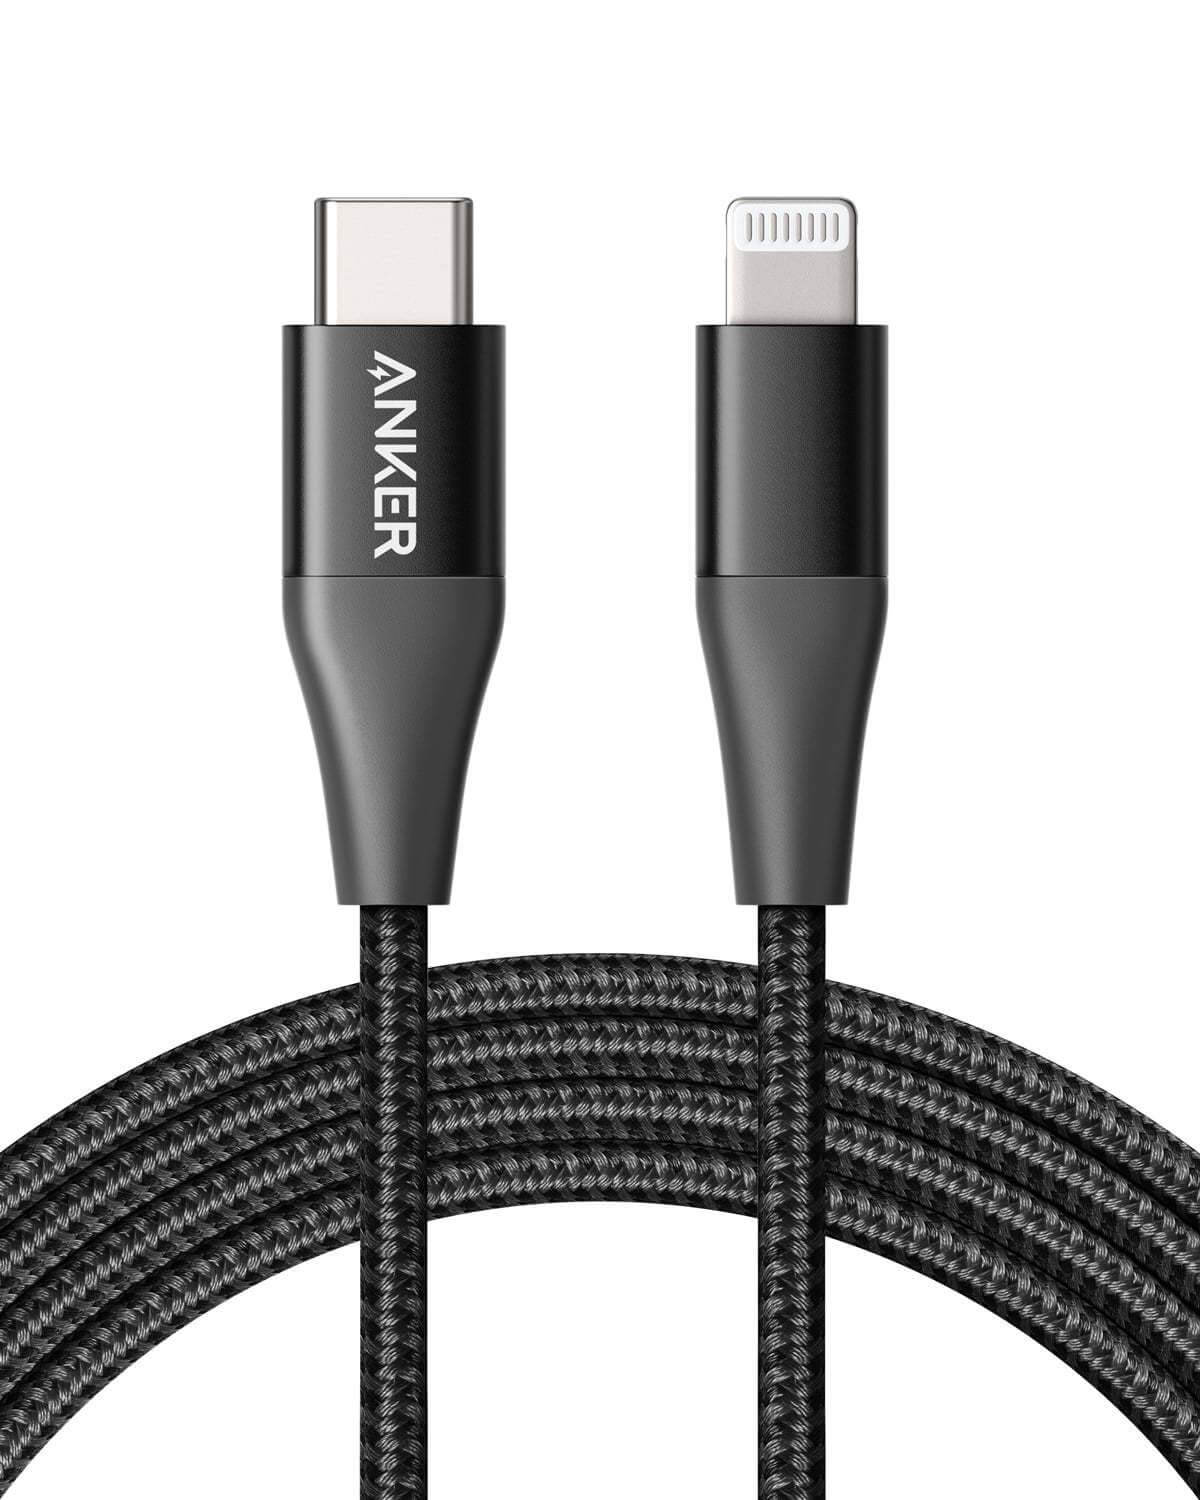 Anker’s Powerline+ II USB C to Lightning Cable: Under $25